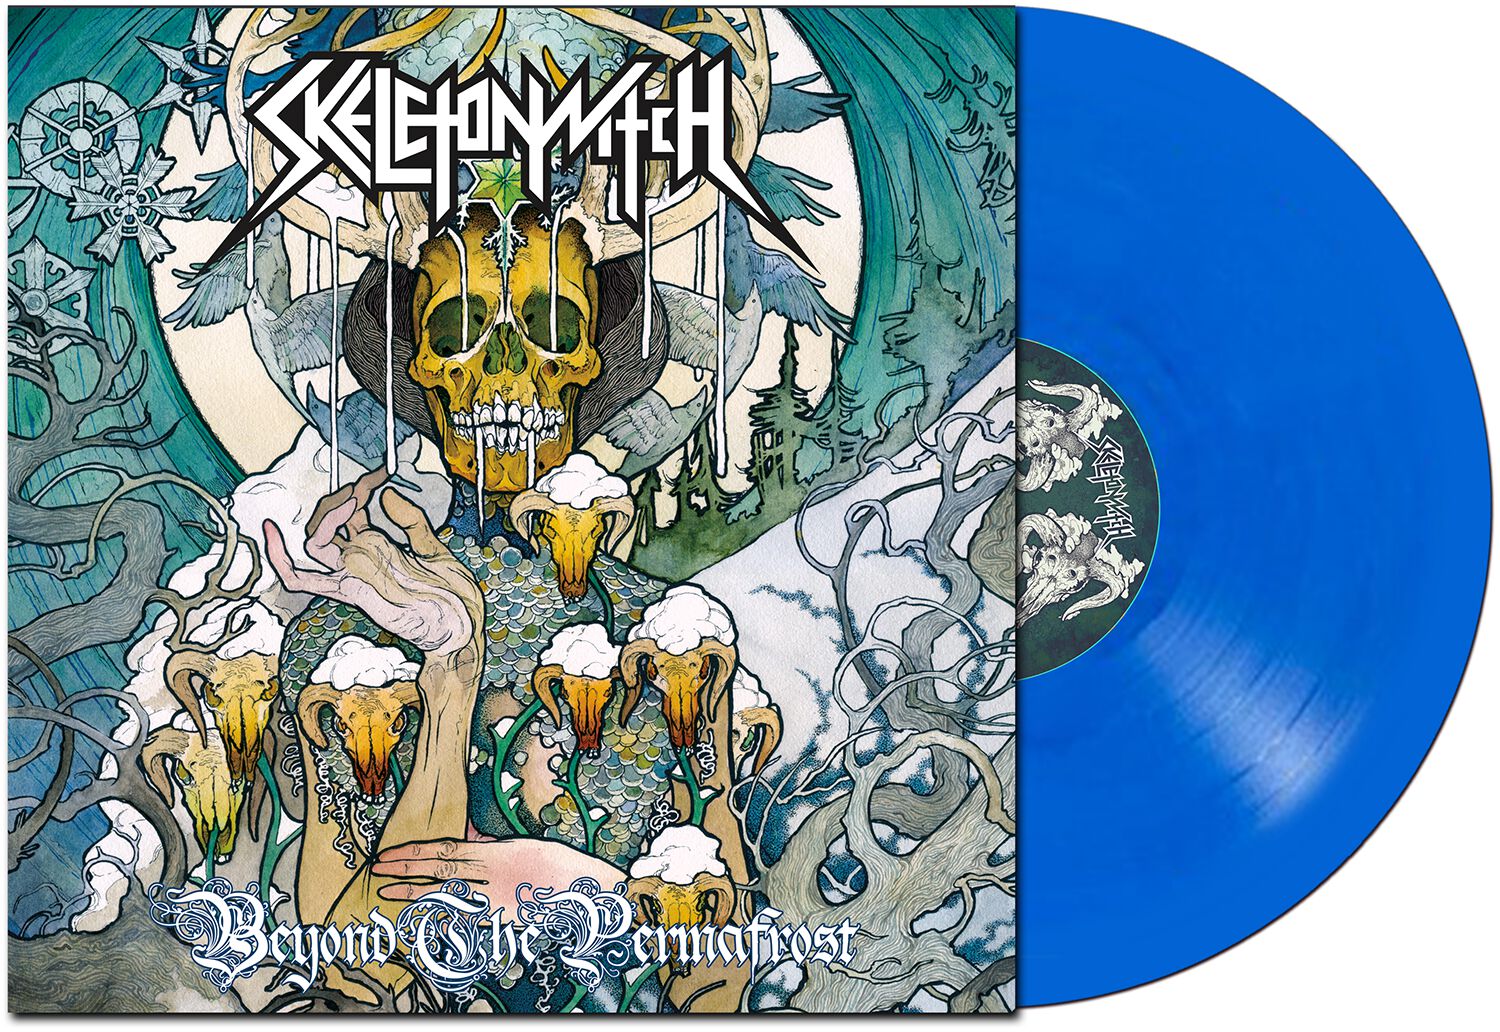 Skeletonwitch Beyond the permafrost LP blue